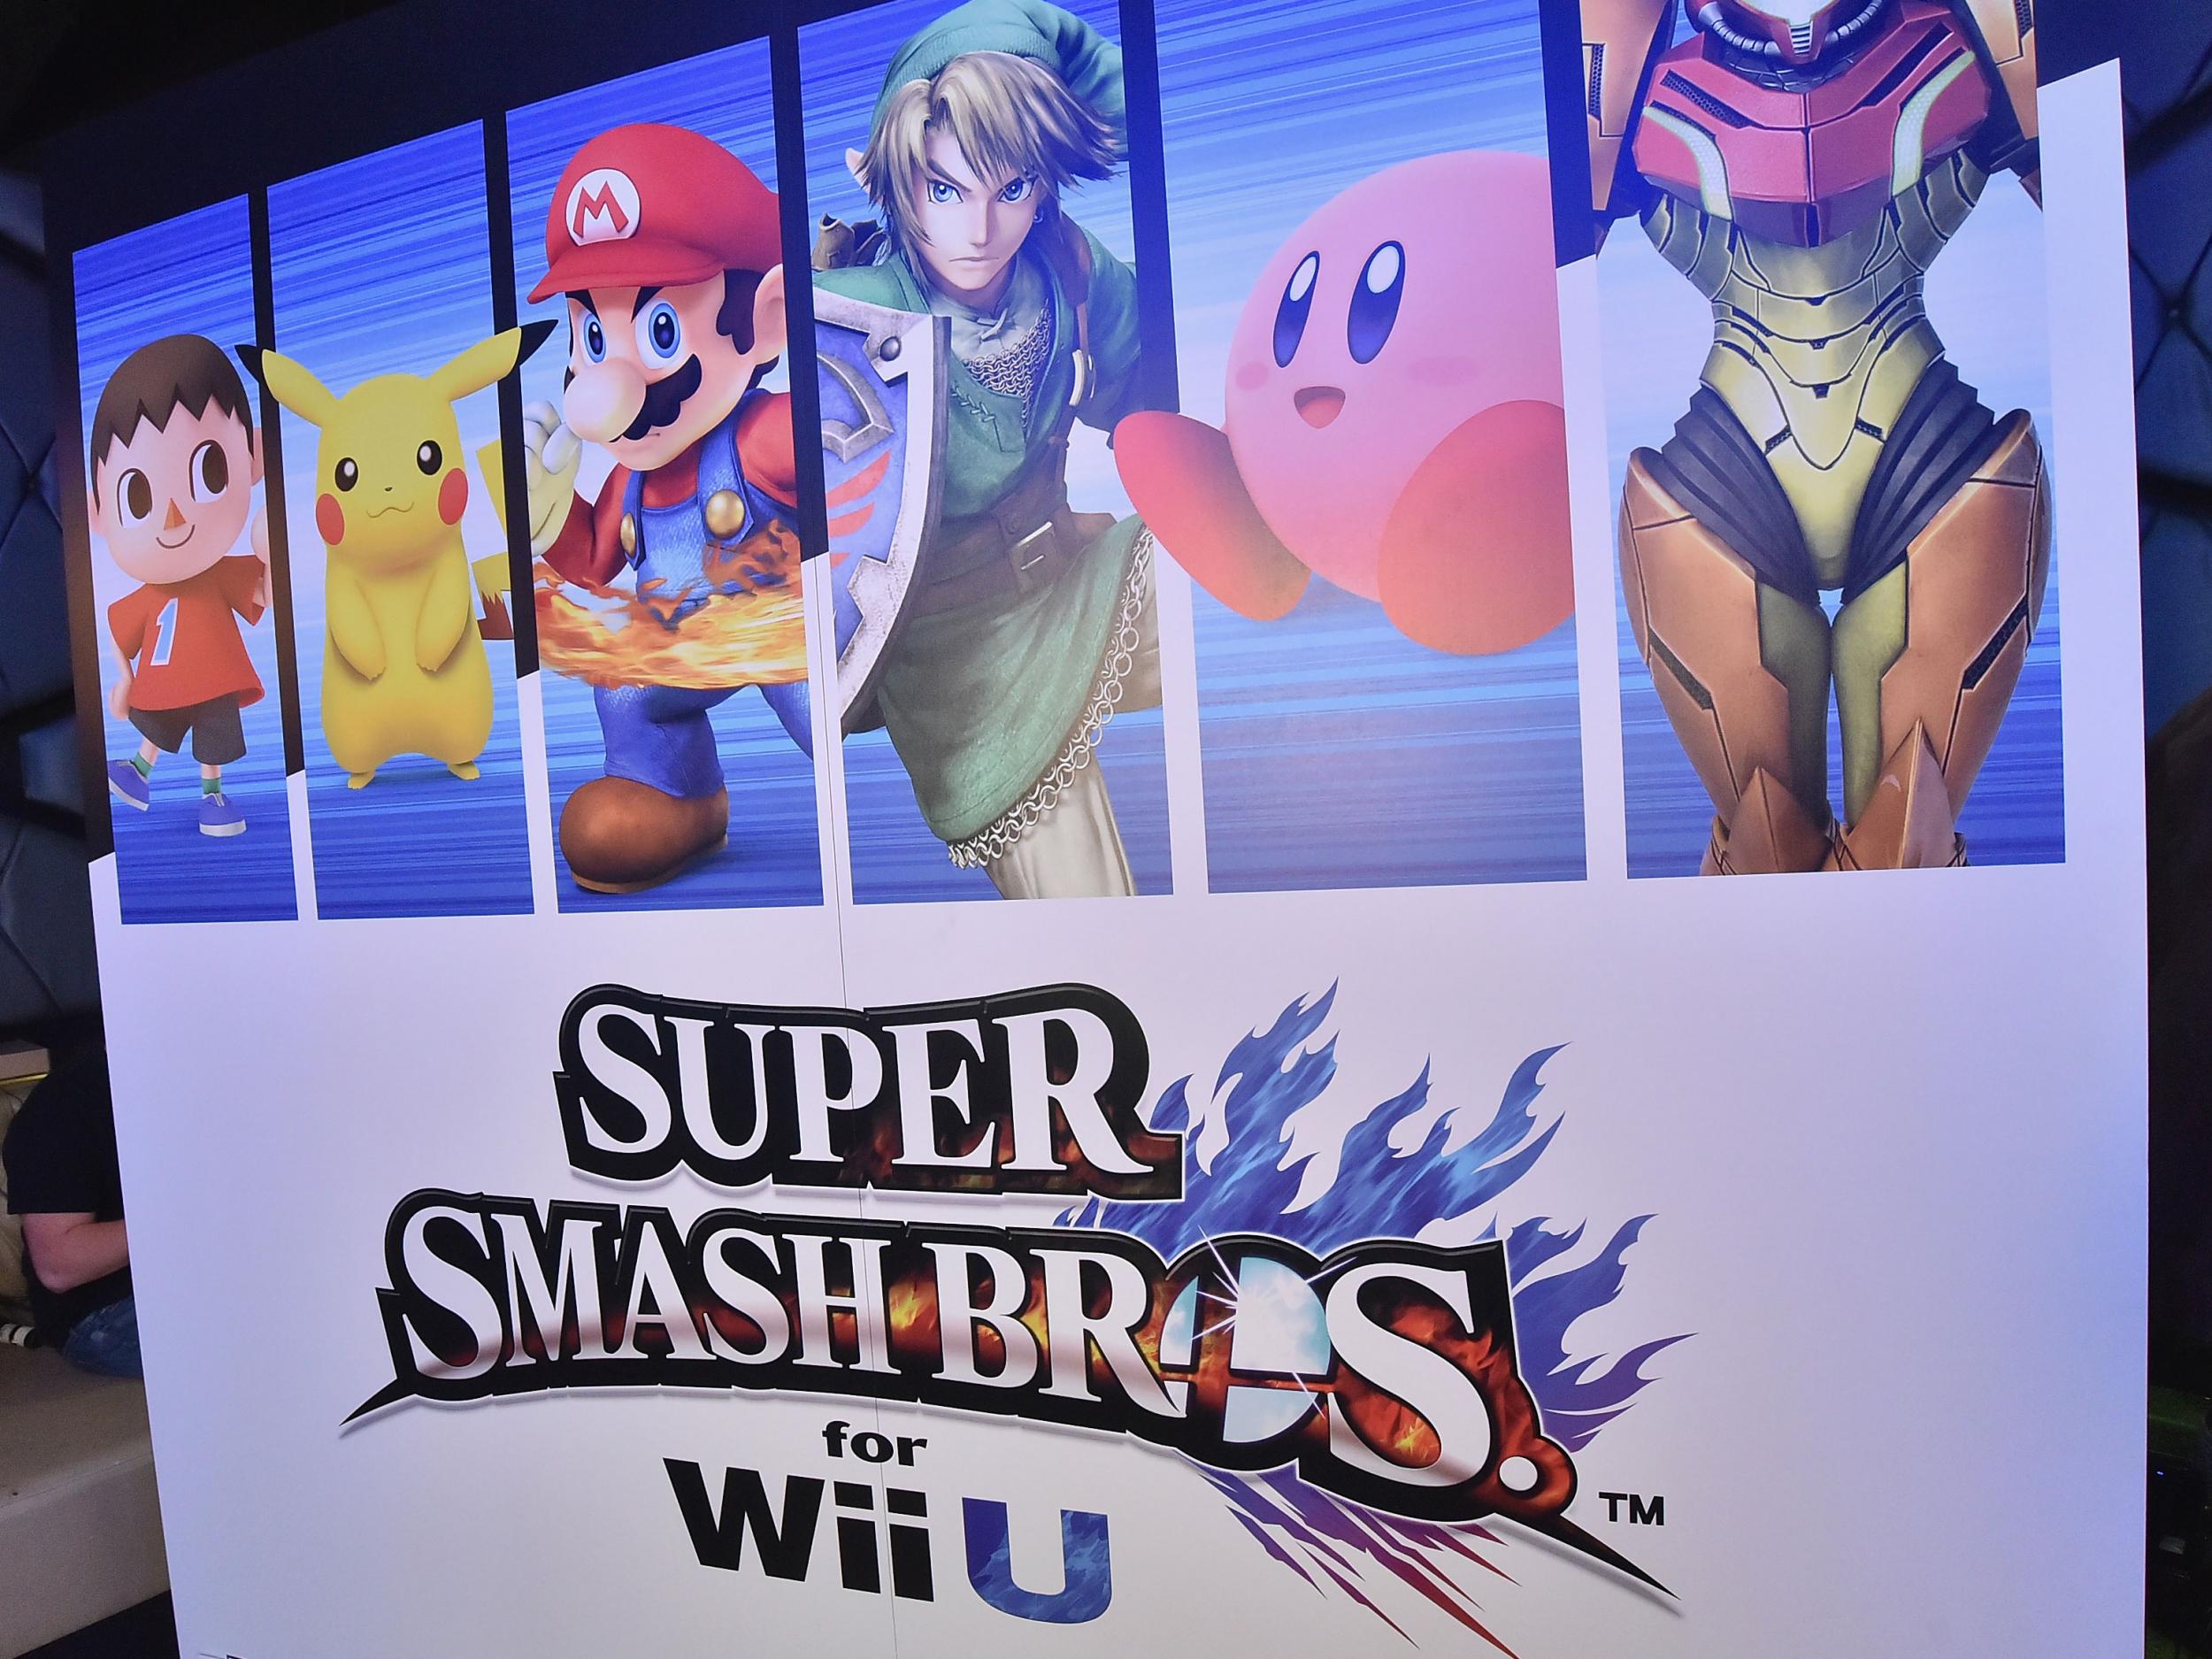 The new Smash Bros. game would be the first since 2014's release of the game for Wii U and 3DS